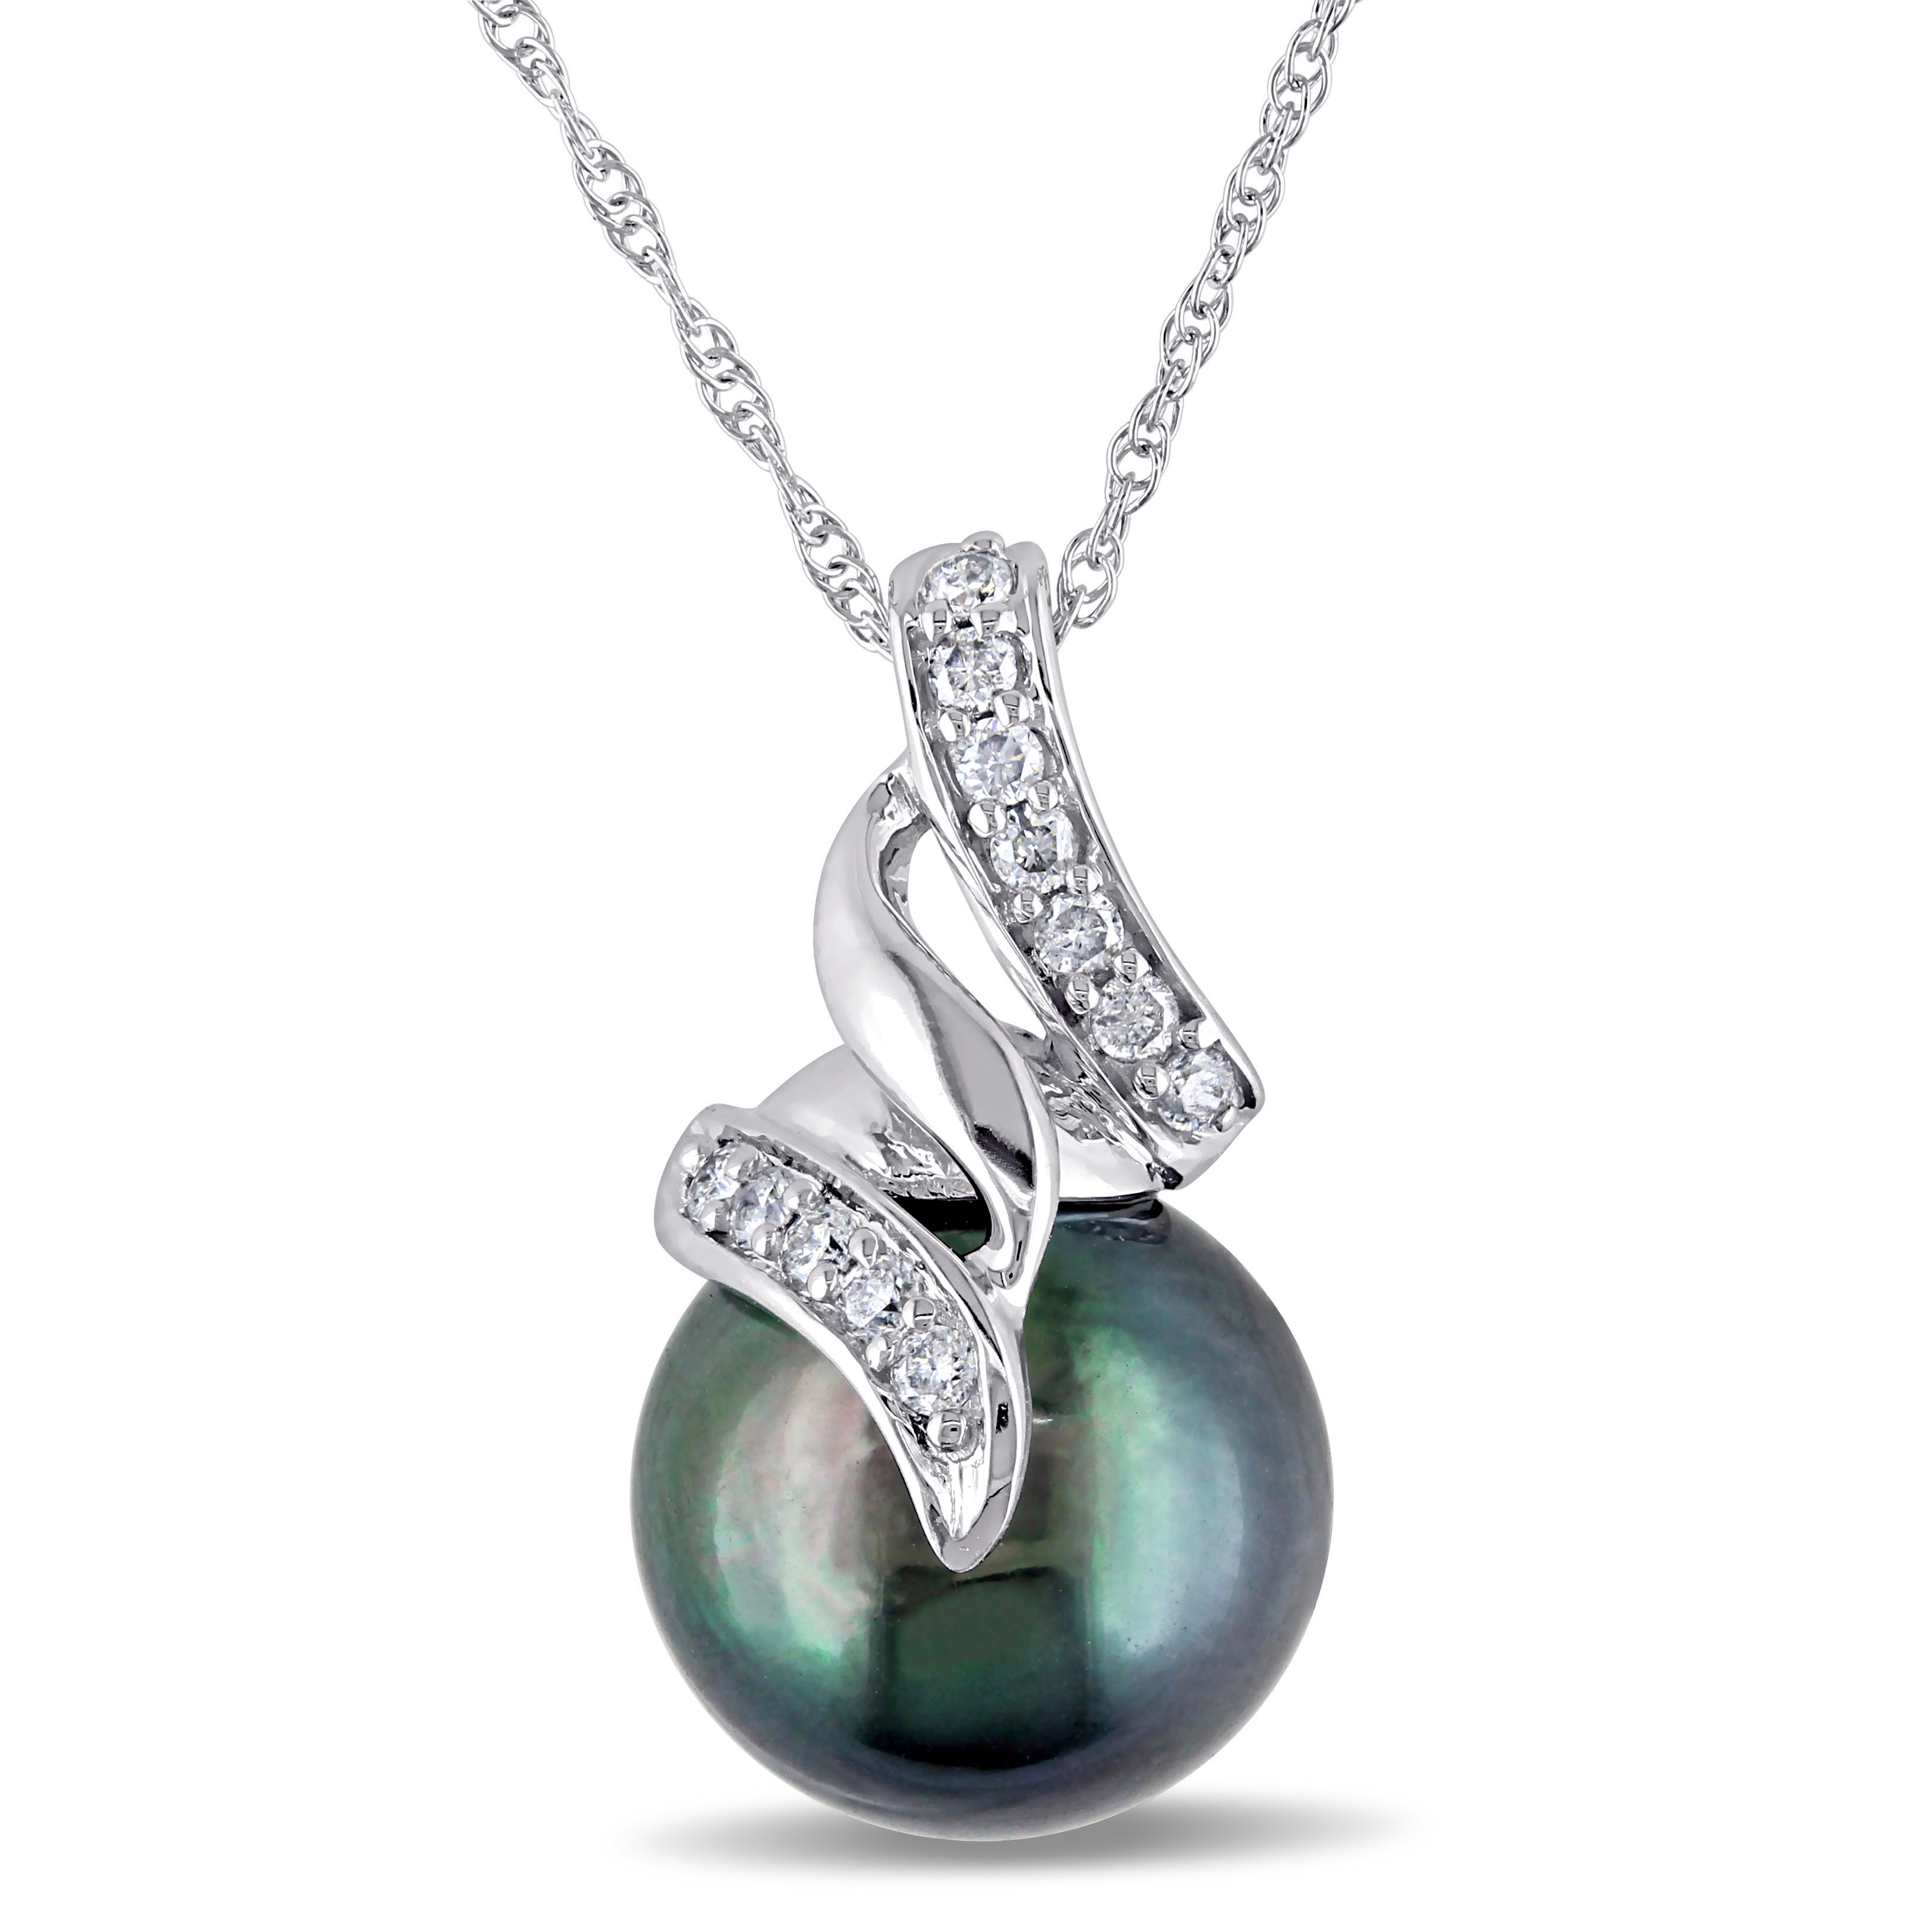 9.5 - 10 MM Black Tahitian Cultured Pearl and 1/10 CT TW Diamond Pendant with Chain in 10k White Gold